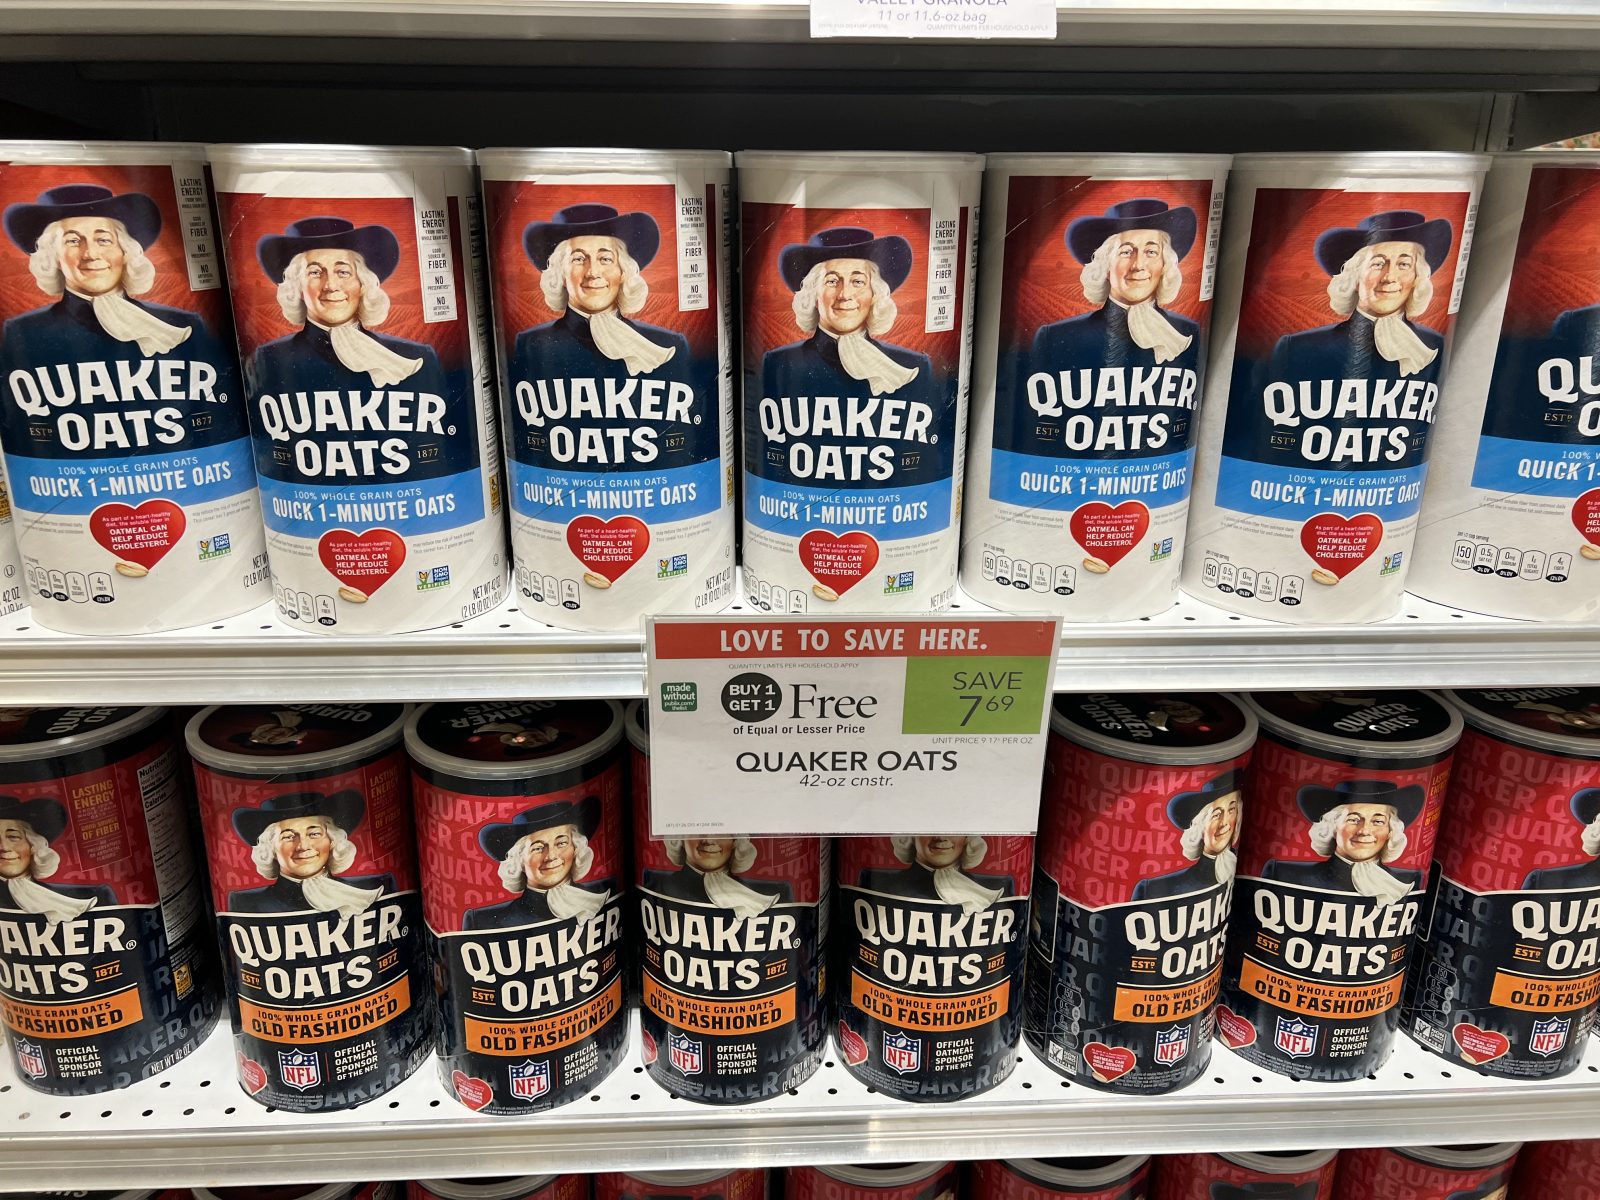 Big Canisters Of Quaker Oats Only $2.85 At Publix - iHeartPublix